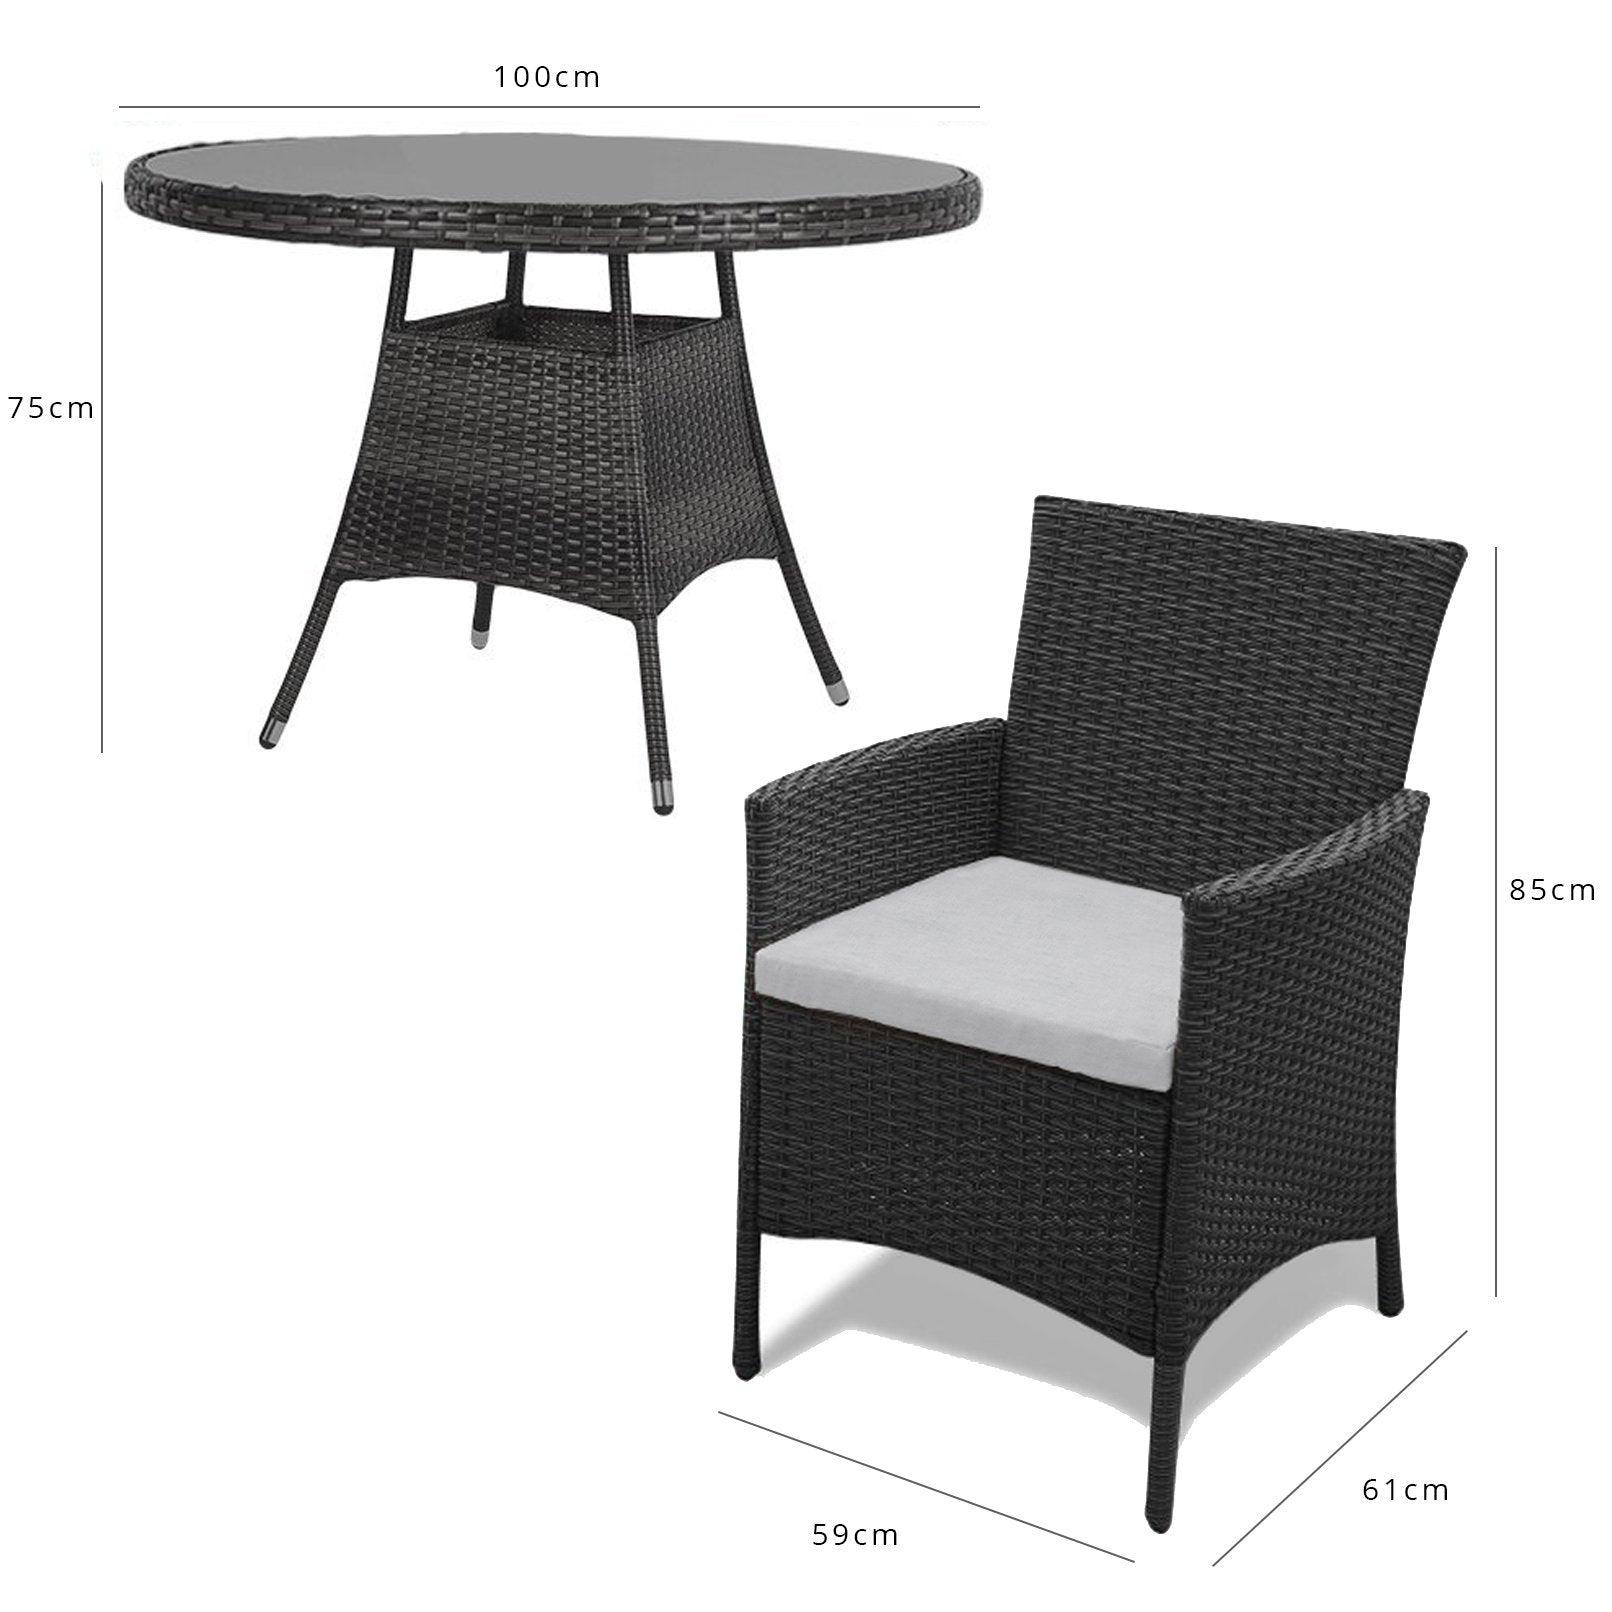 Kemble 4 Seater Rattan Round Dining Table & Chair Set Black - Garden Furniture Outdoor